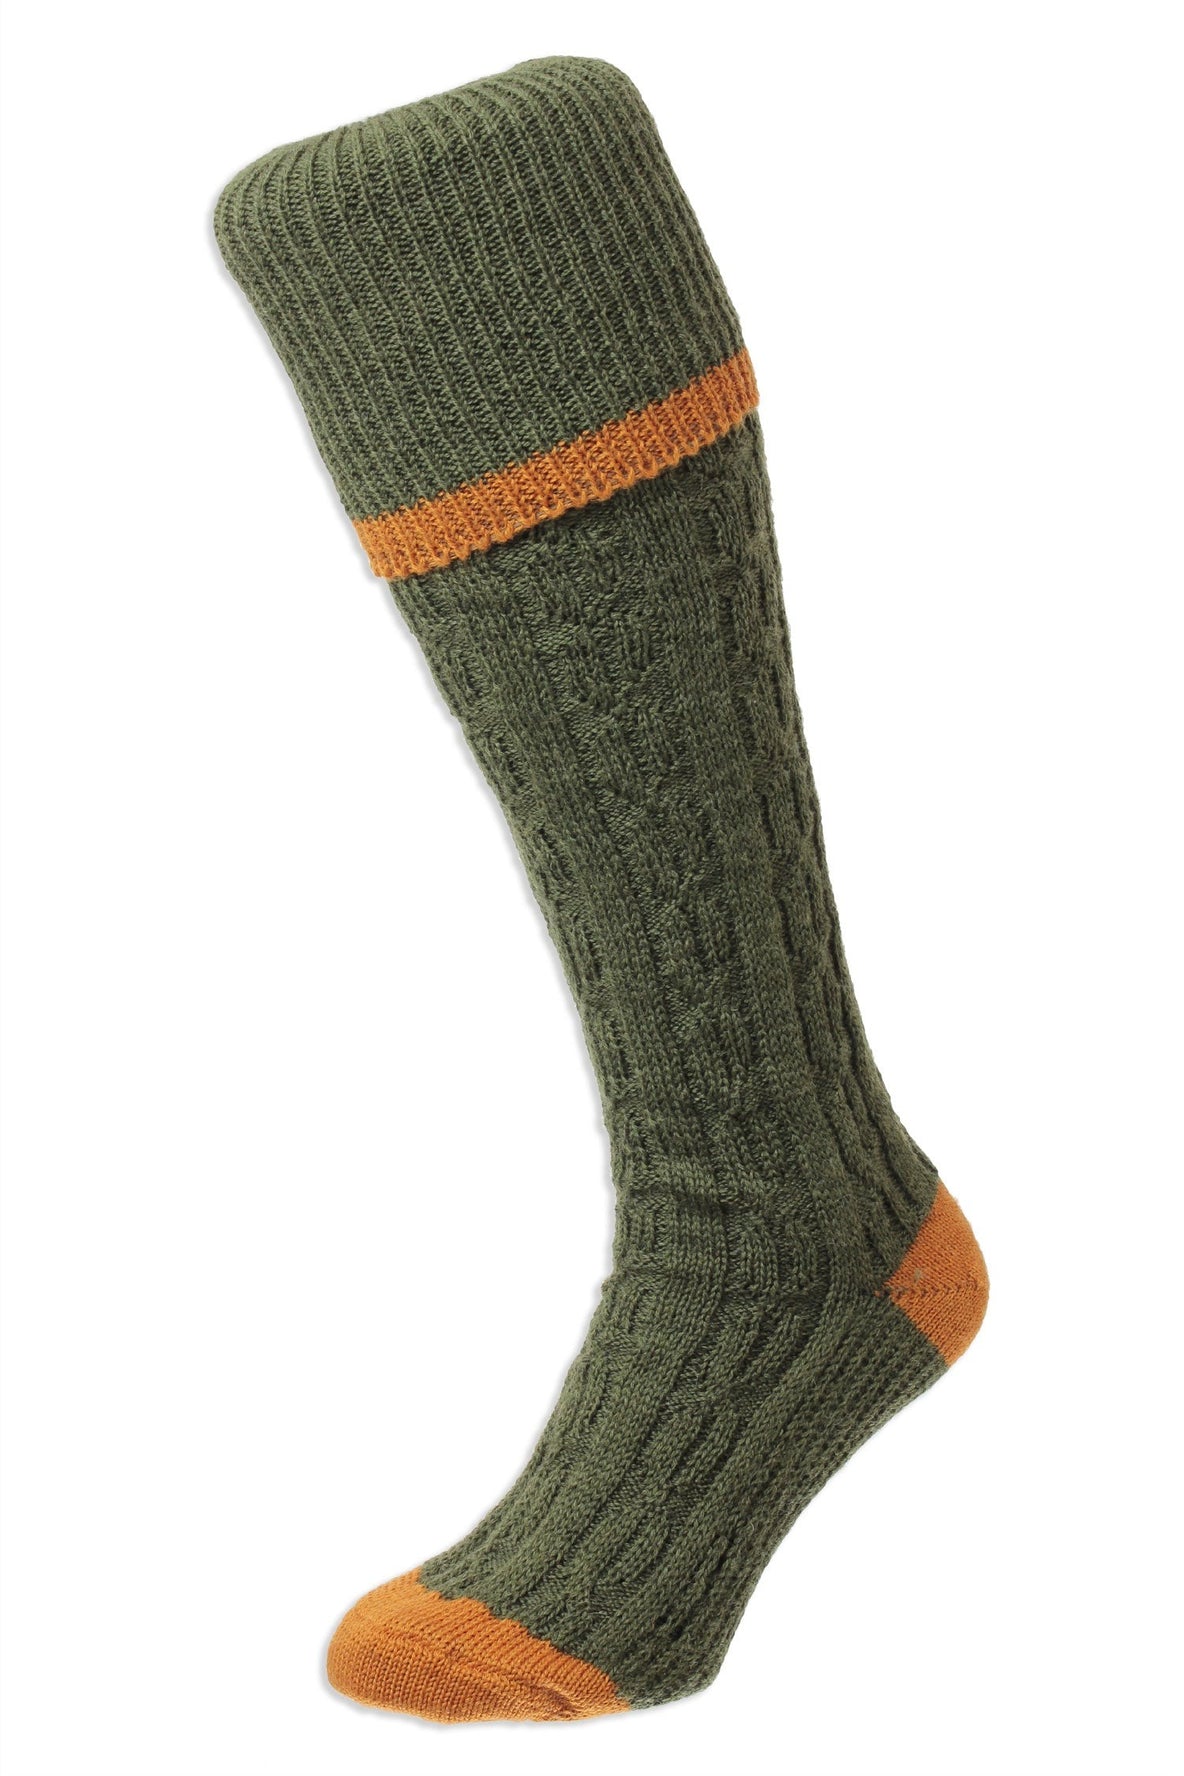 Green olive and orange Cable Stripe Long Country Sock by HJ Hall  